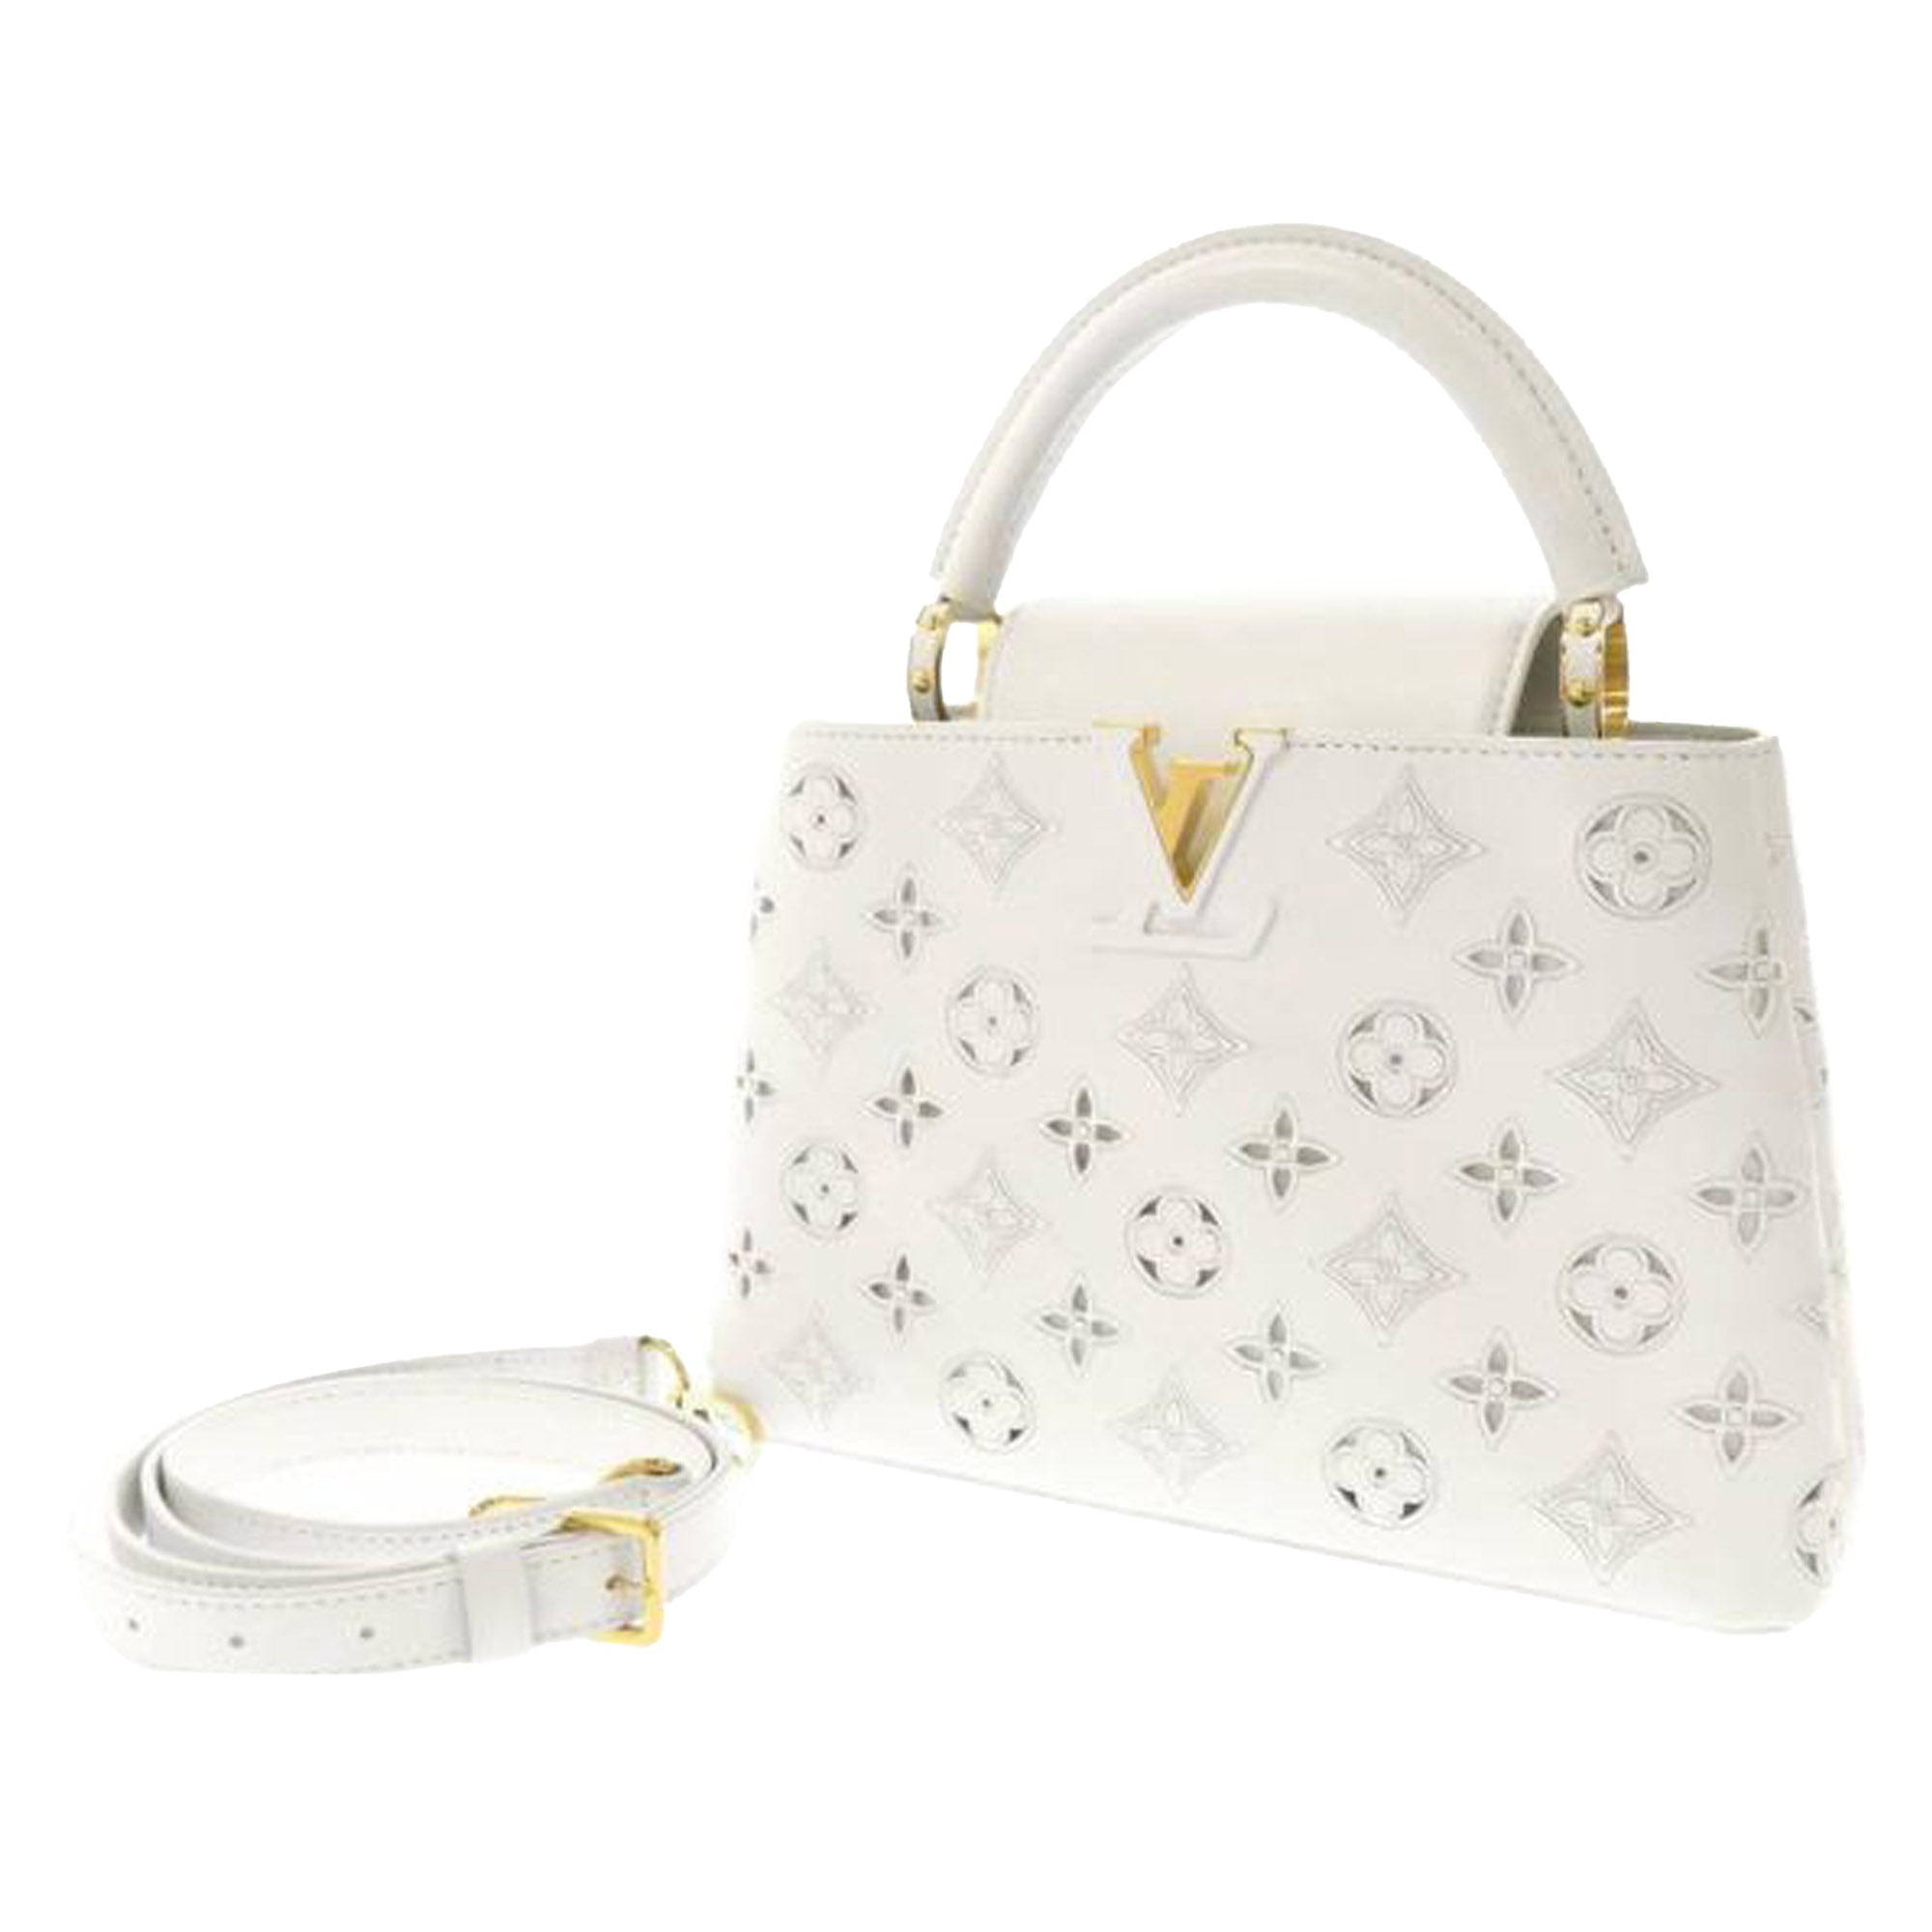 Louis Vuitton Capucines Handbag Limited Edition Broderies PM at